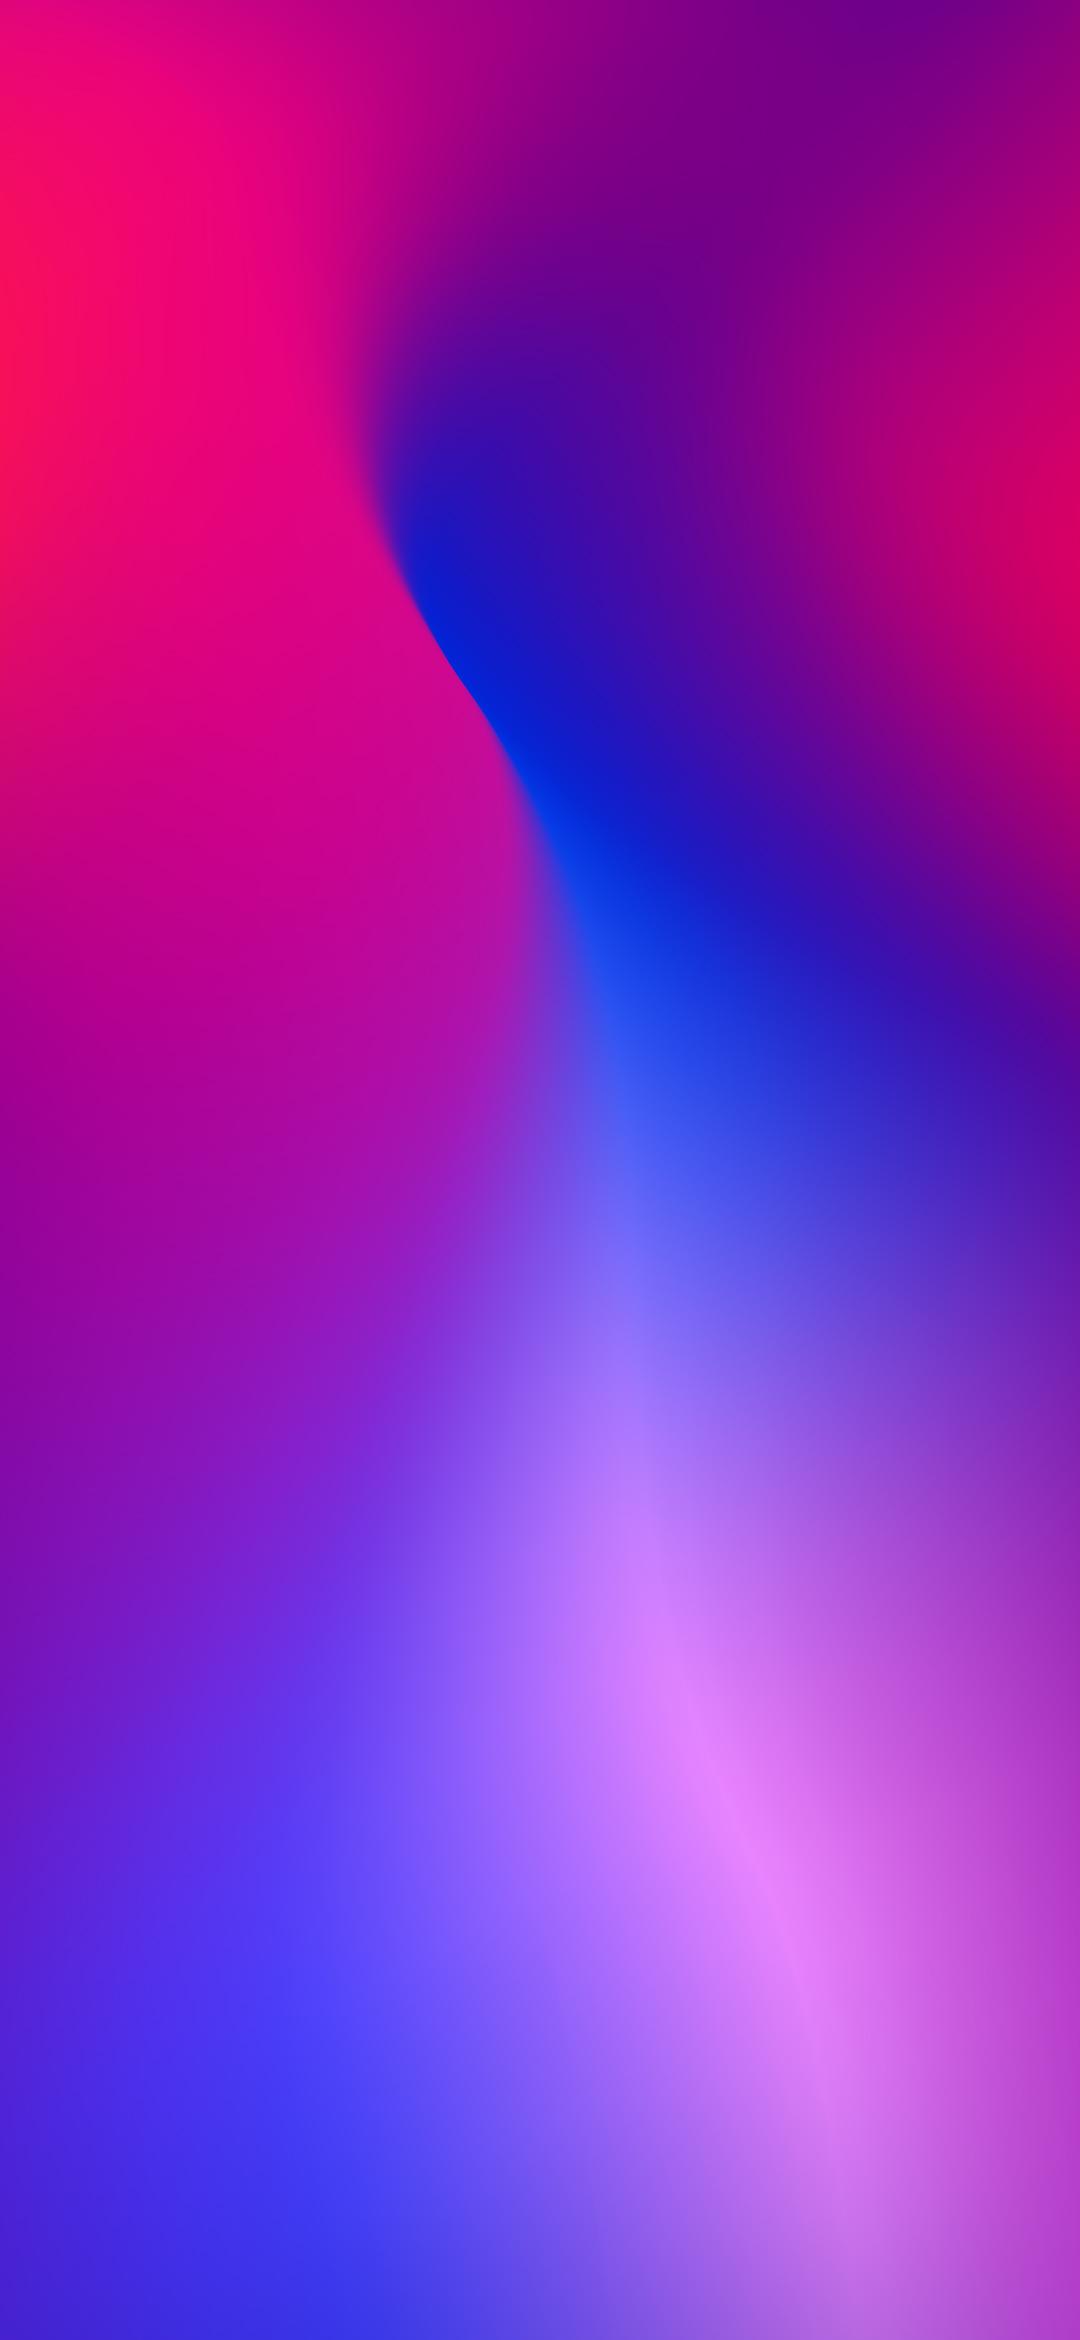 Oppo F11 Pro Phone Wallpapers - Wallpaper Cave